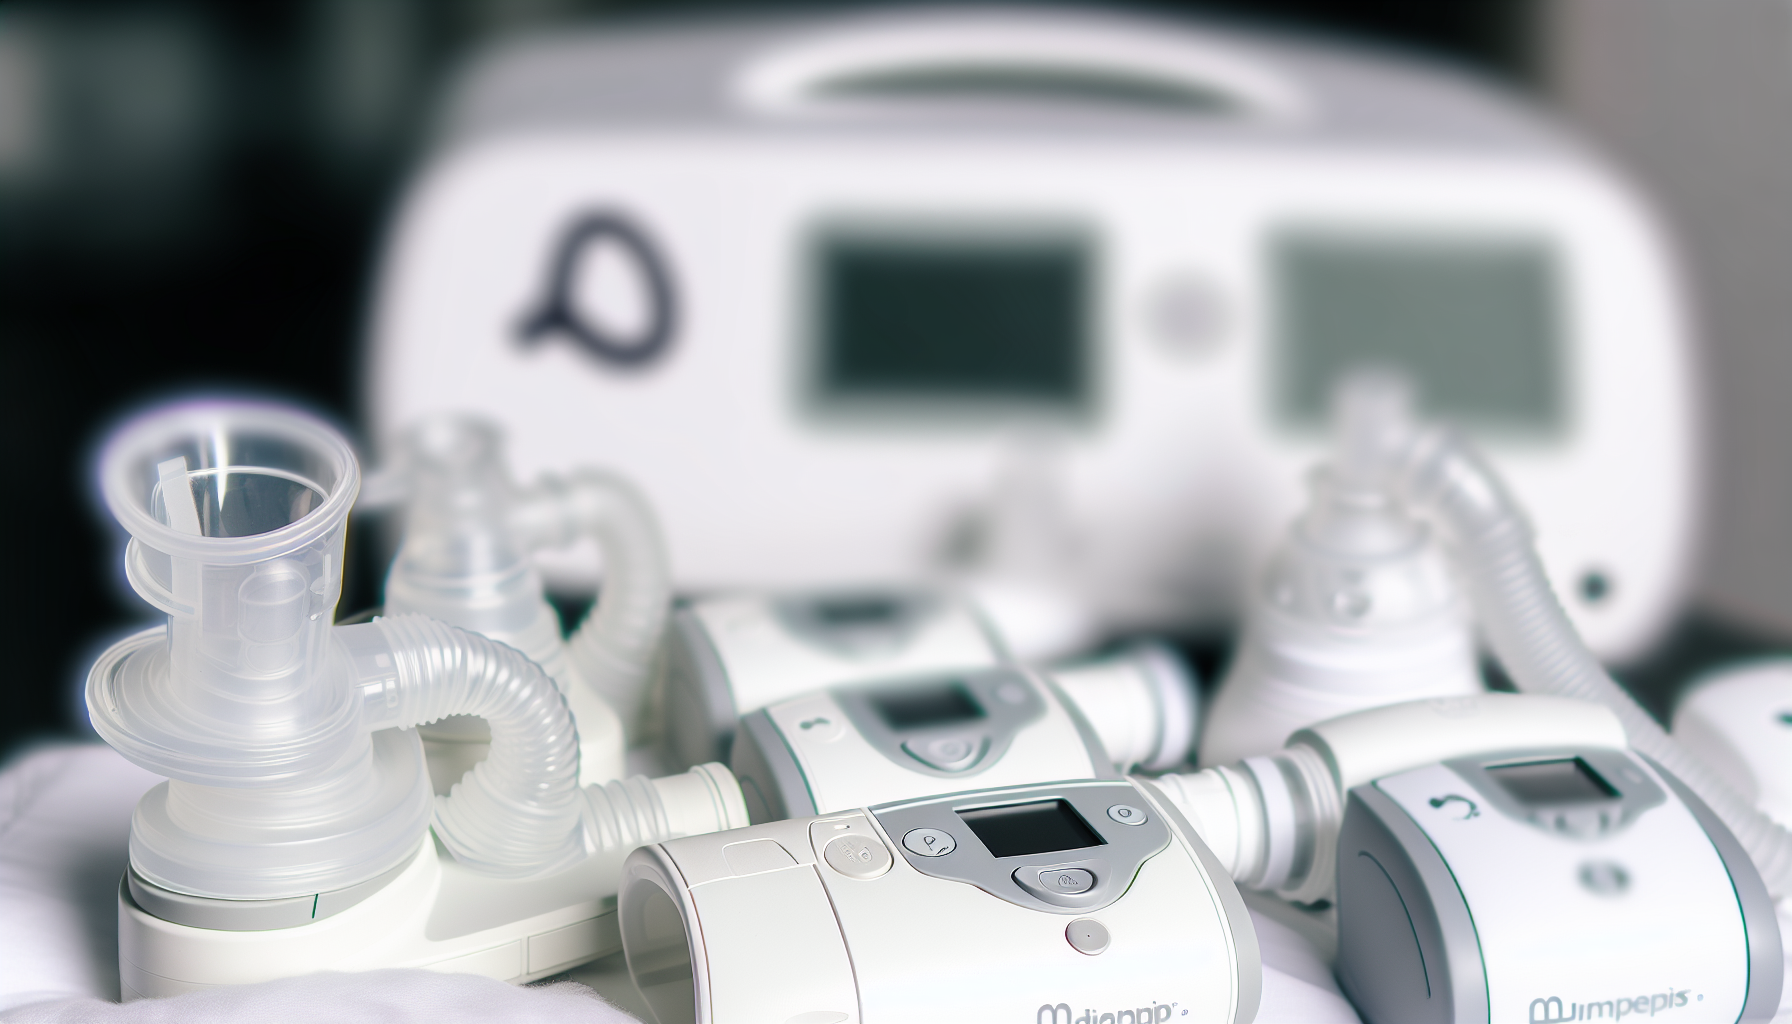 CPAP and BiPAP devices with blurred background